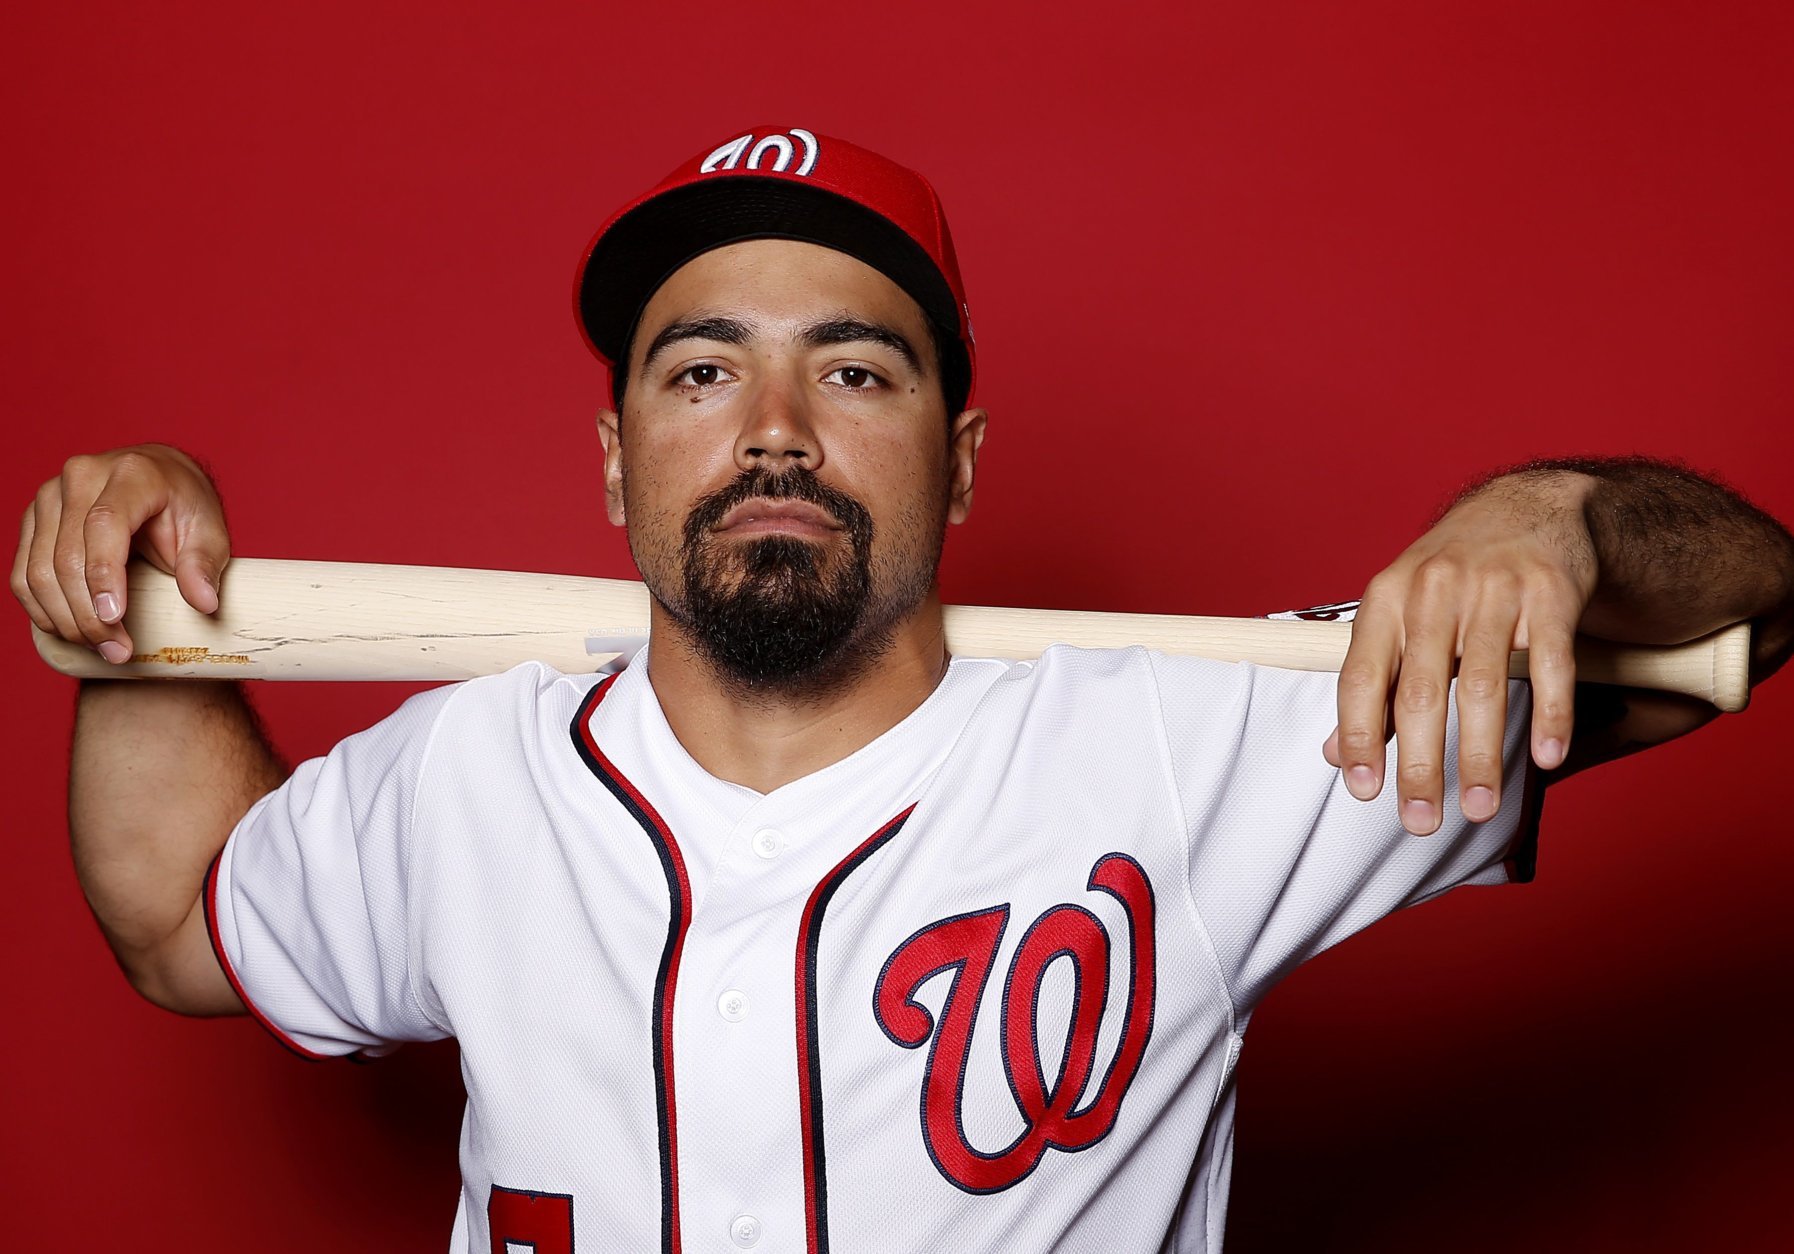 WEST PALM BEACH, FLORIDA - FEBRUARY 22:  Anthony Rendon #6 of the Washington Nationals poses for a portrait on Photo Day at FITTEAM Ballpark of The Palm Beaches during on February 22, 2019 in West Palm Beach, Florida. (Photo by Michael Reaves/Getty Images)